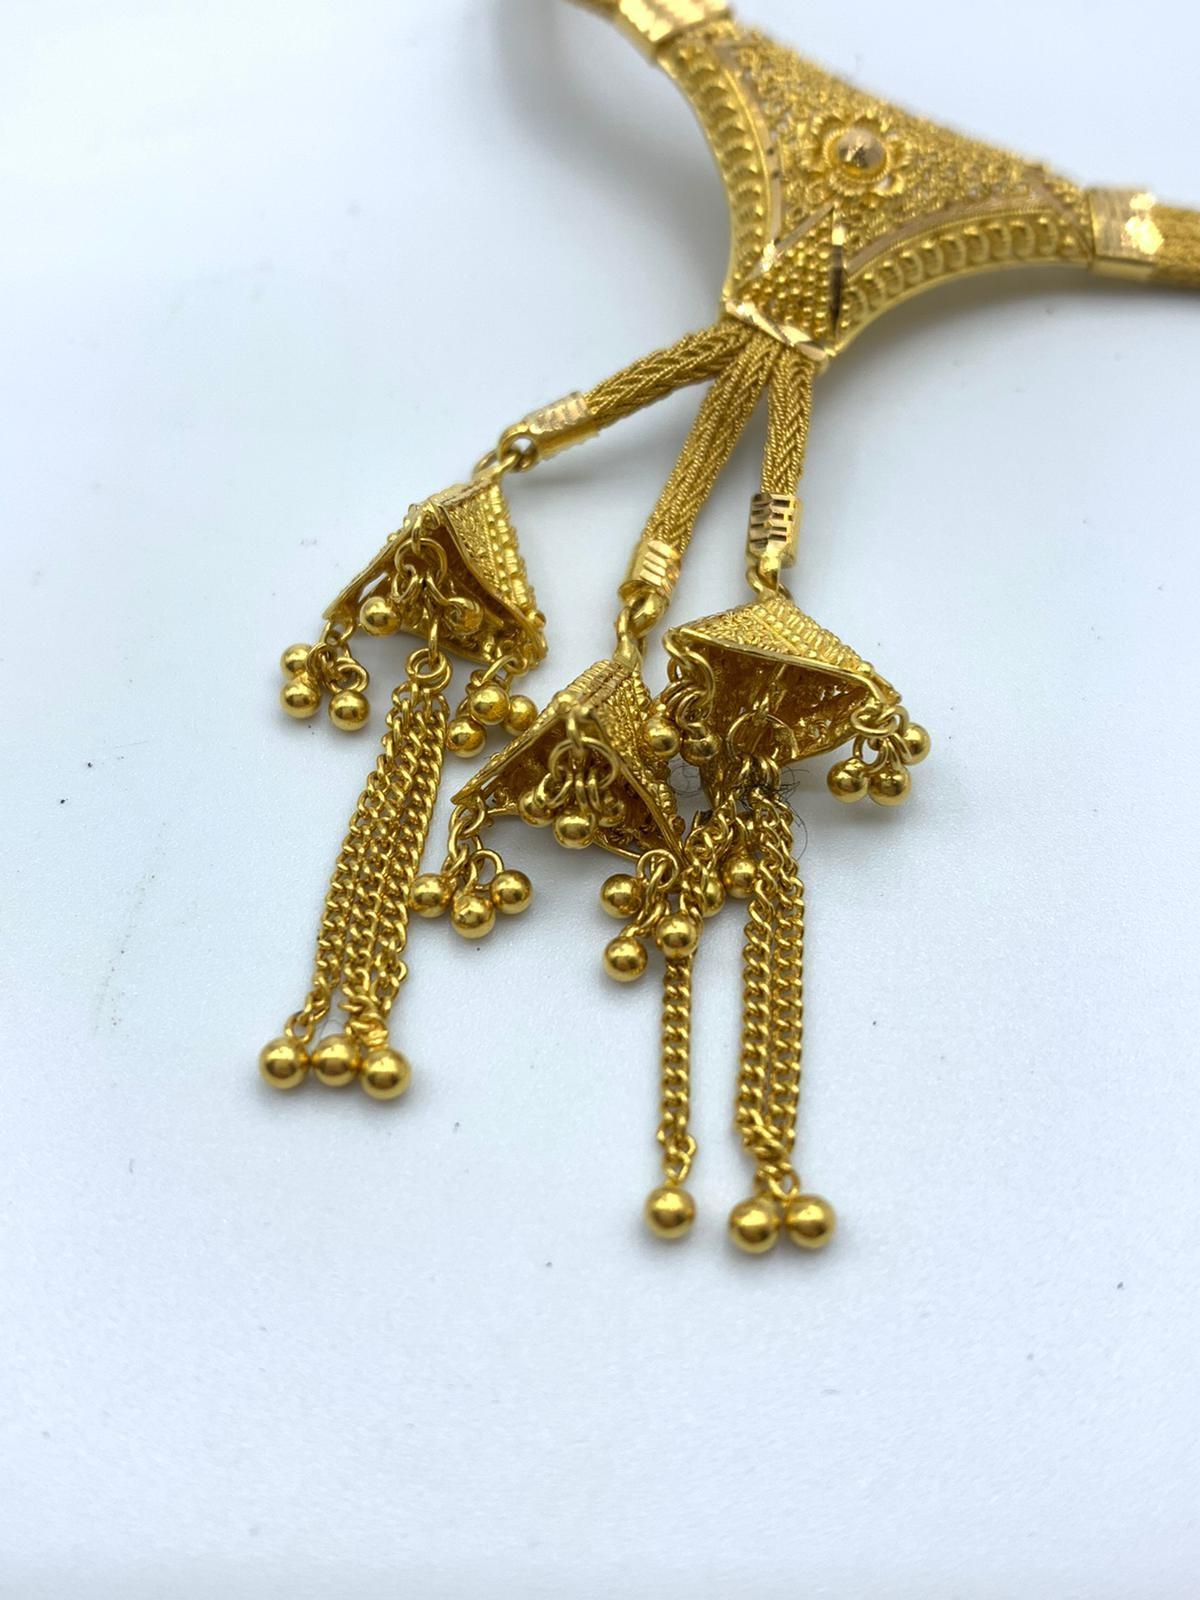 22ct yellow gold necklace, weight 26.6g and 36cm long approx (3-1951 ref) - Image 6 of 6